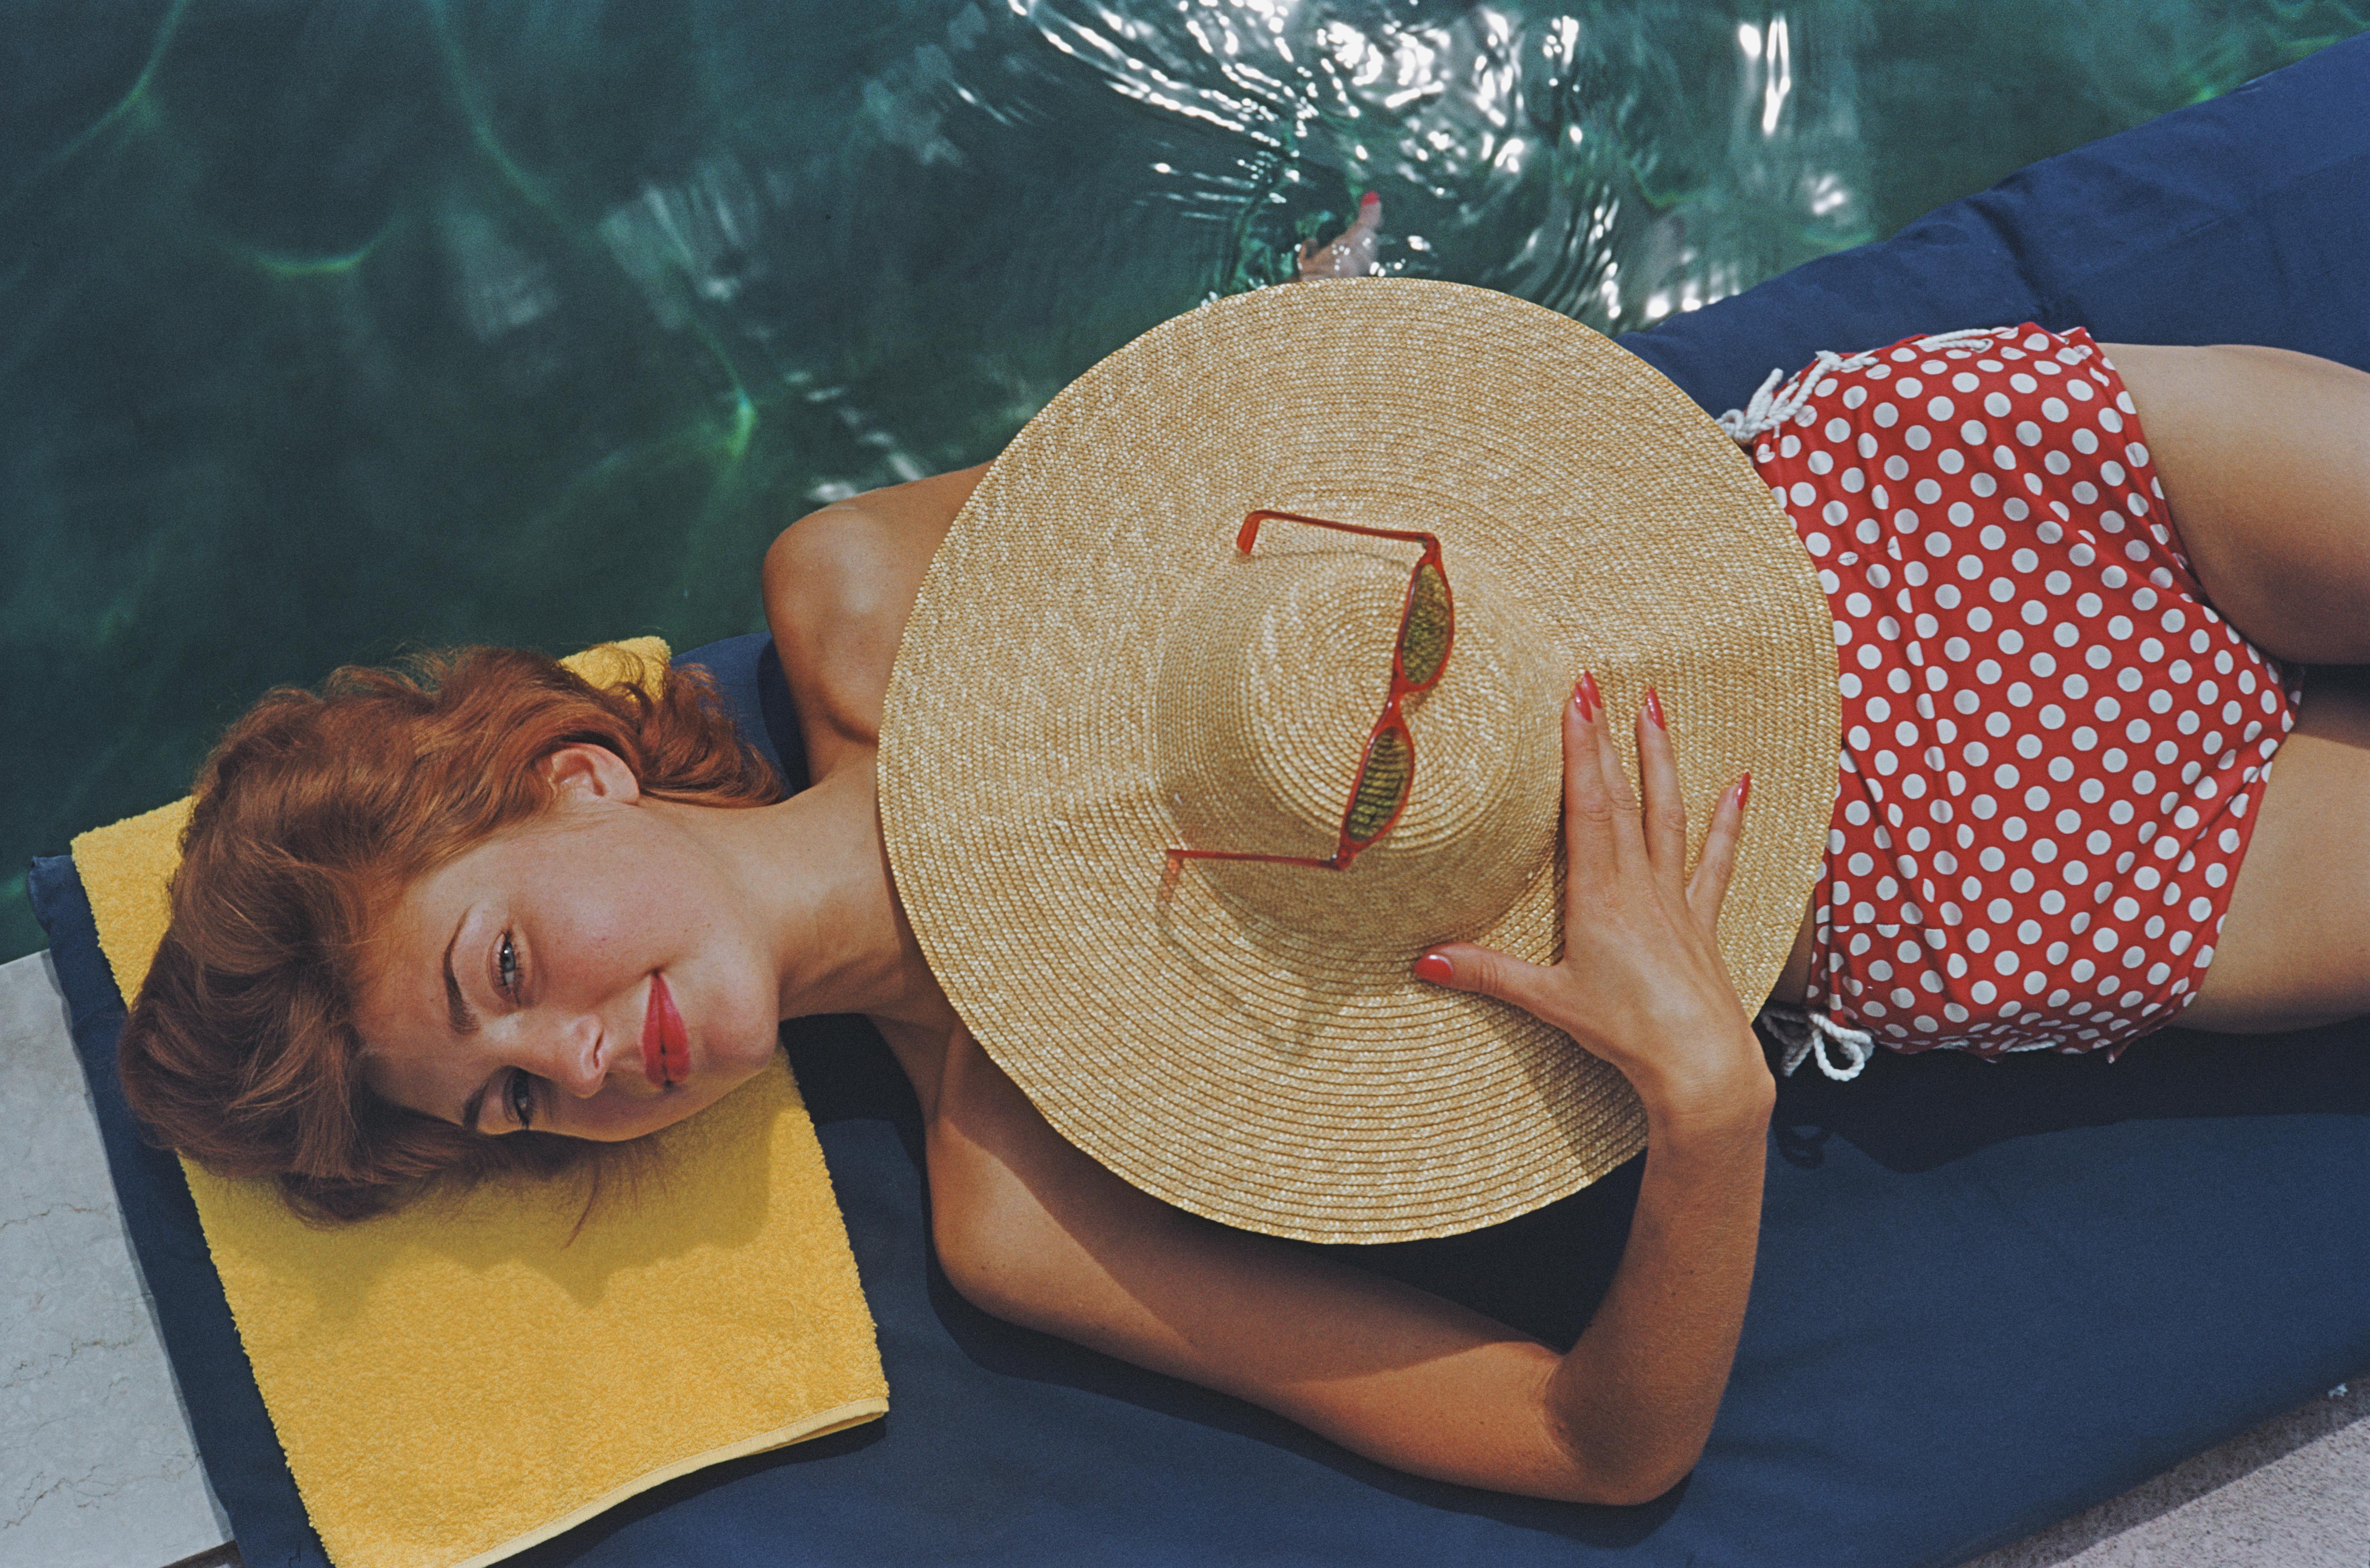 Slim Aarons
Sunbathing In Burgenstock
1955
C print
estate edition of 150

Lilian Hanson, sunbathing by a pool at the Brgenstock Resort in Canton Nidwalden, Switzerland, 1955. 

Estate stamped and hand numbered edition of 150 with certificate of